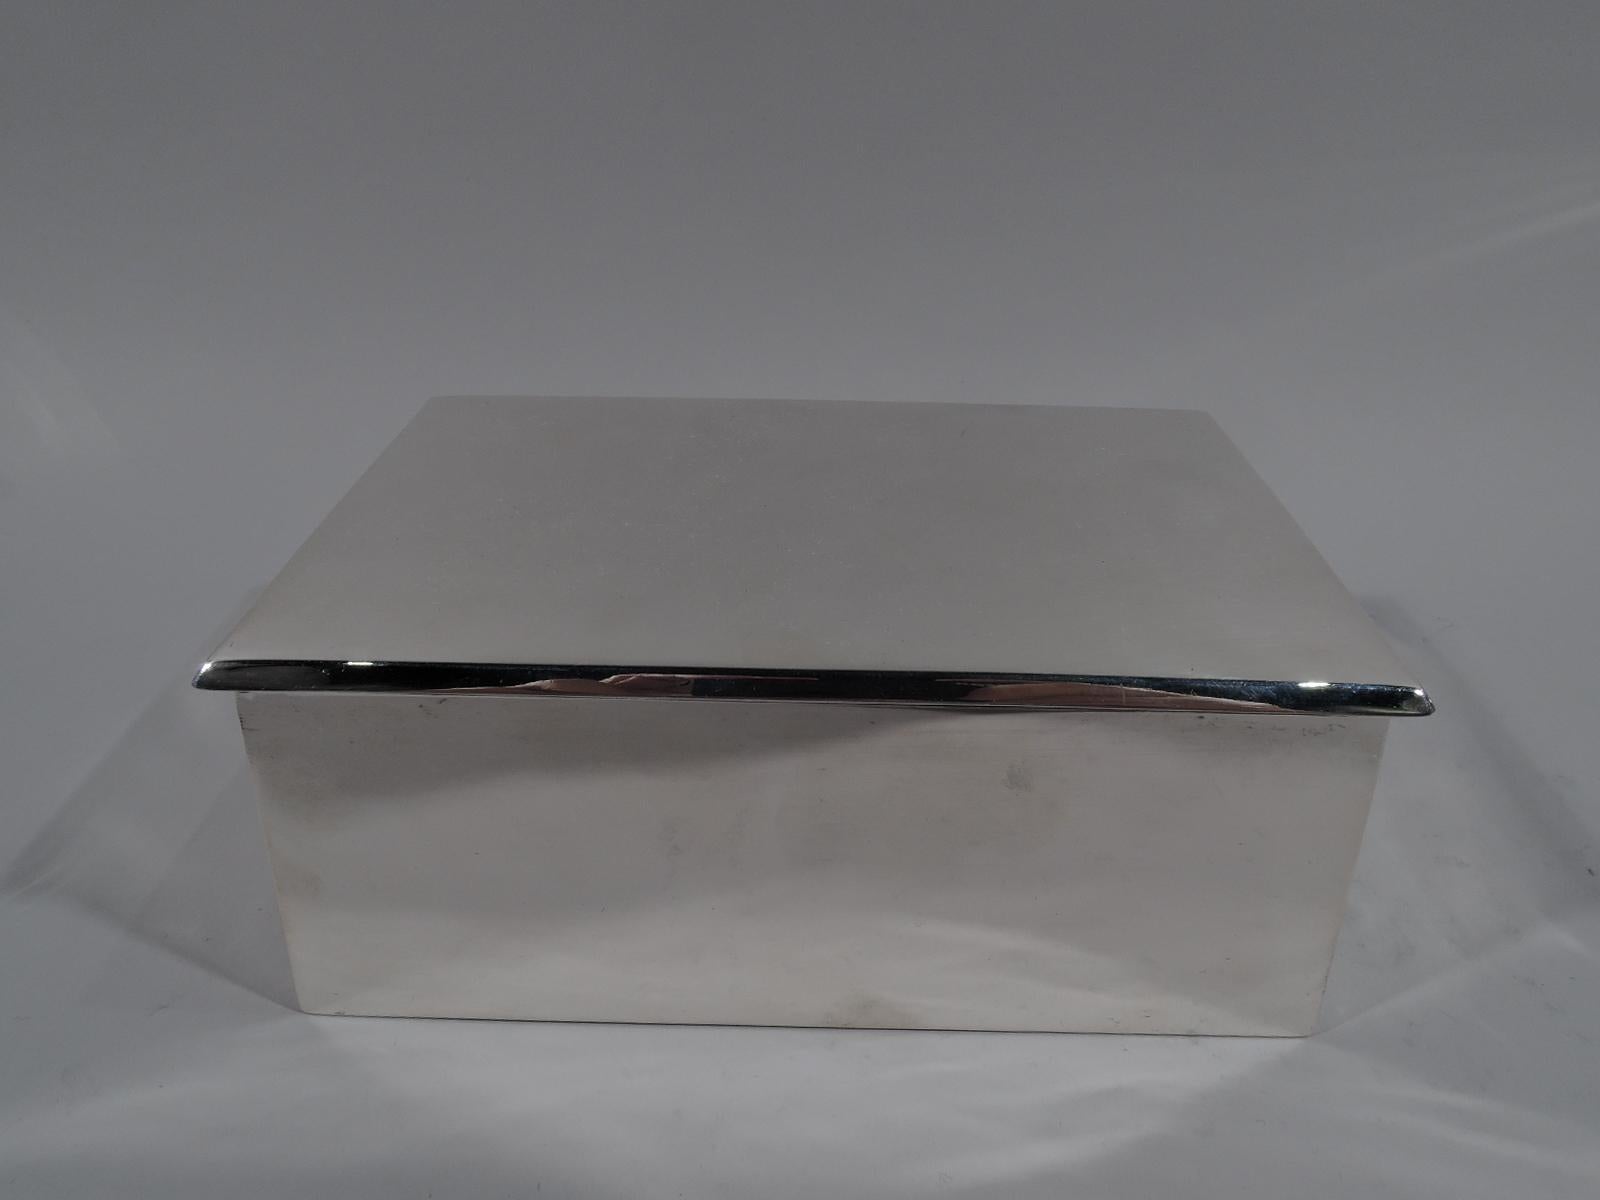 American Modern sterling silver box. Made by William B. Kerr in Newark, ca 1910. Straight and gently inward tapering sides. Cover hinged and rectangular with slight overhang. Box and cover interior cedar lined. Underside felt lined. Fully marked and